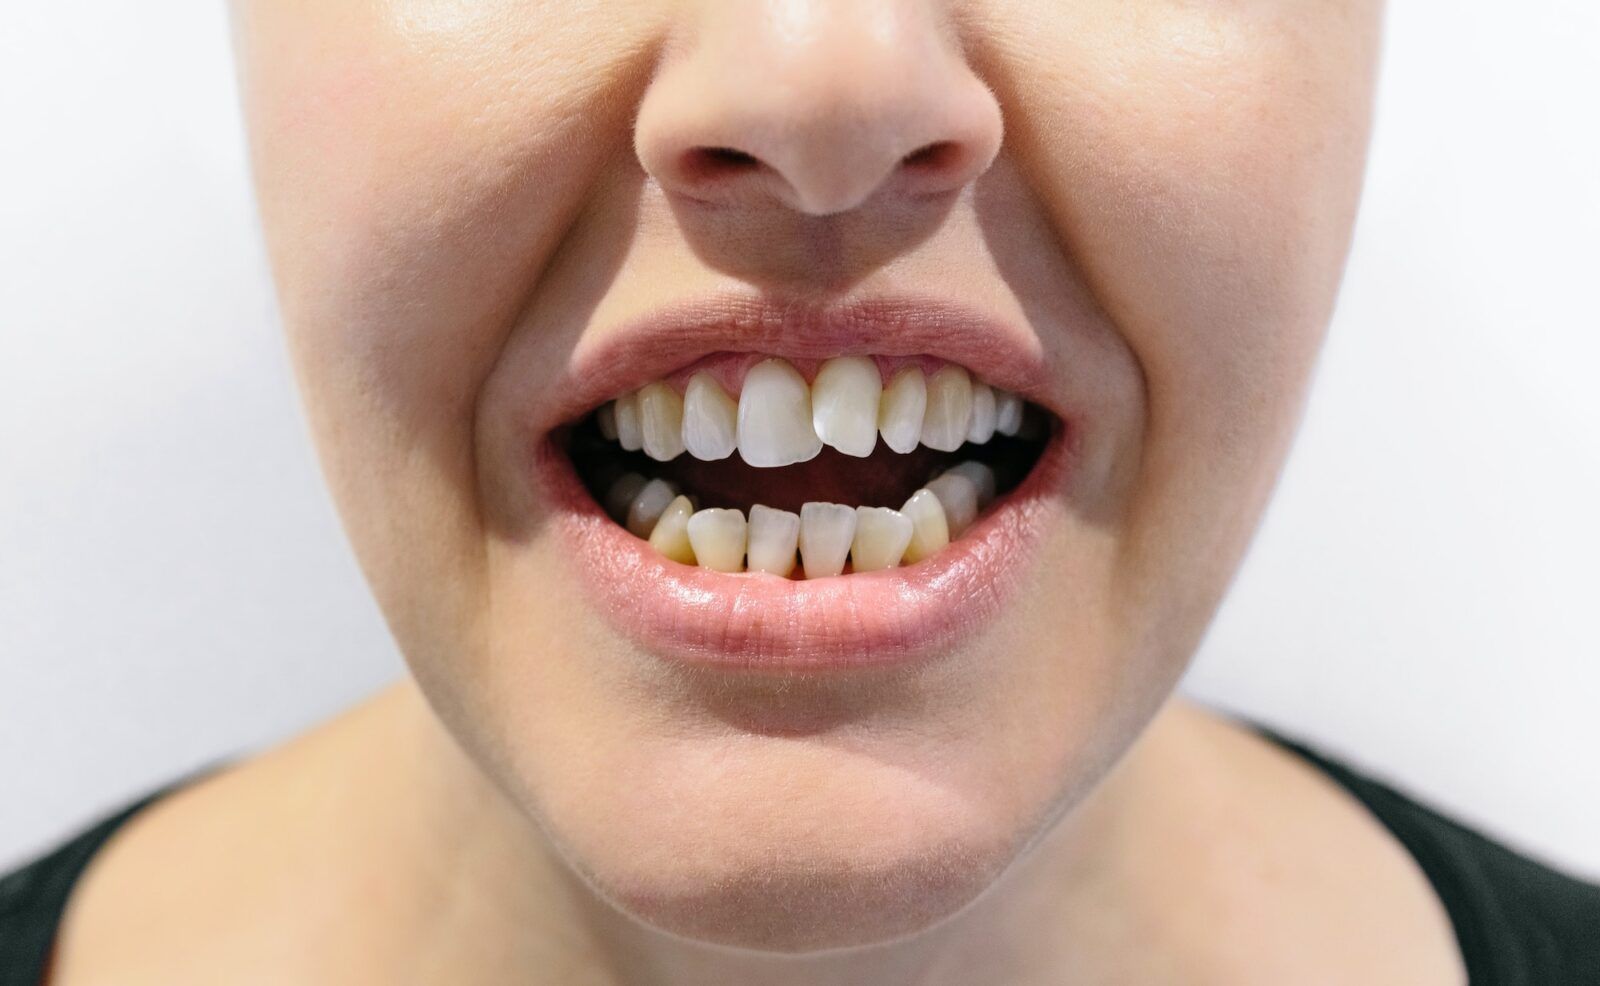 Woman open mouth with crooked teeth